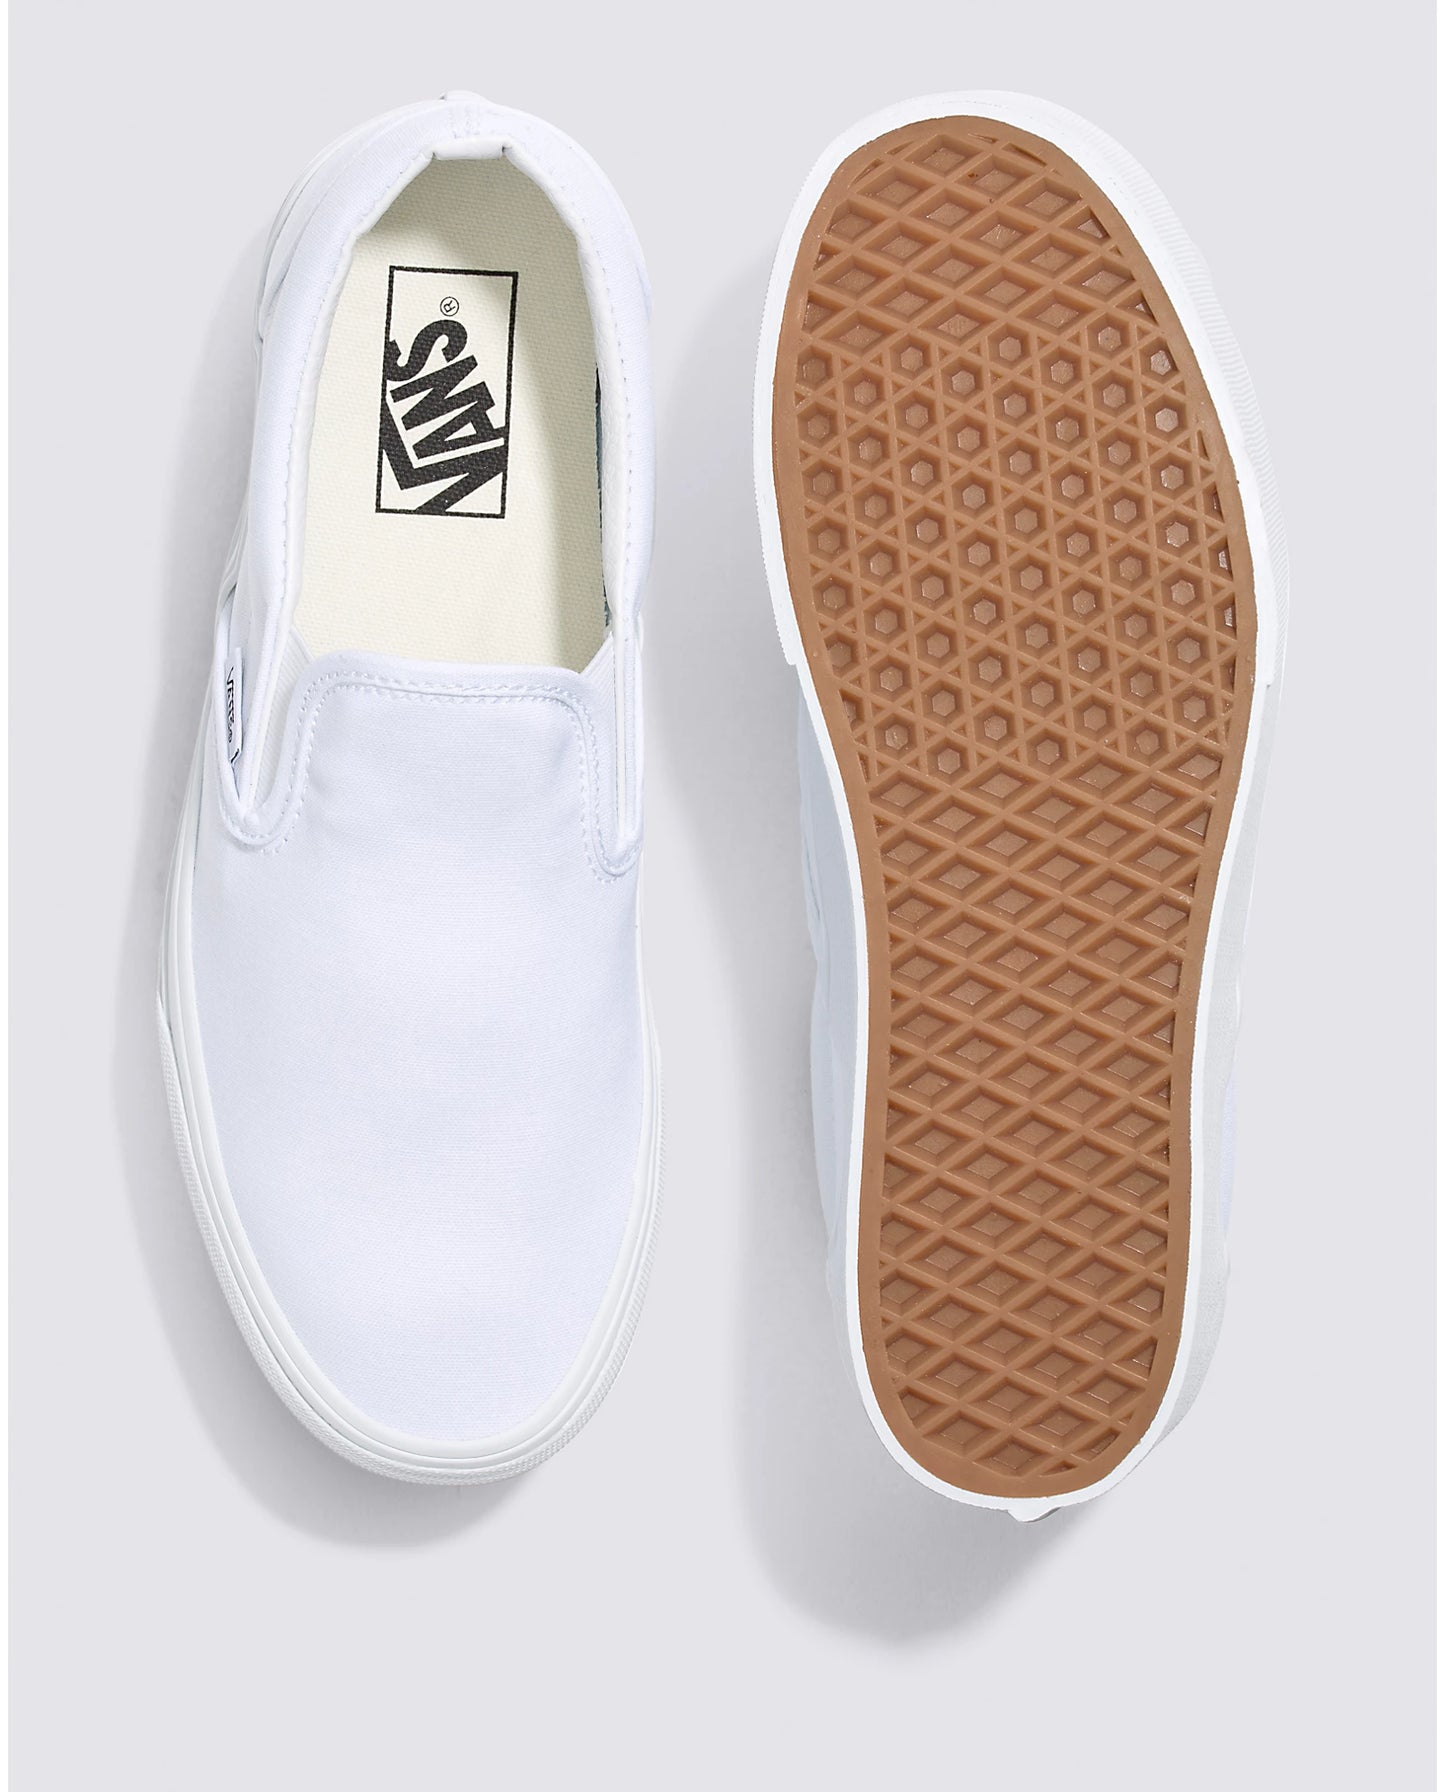 Classic Slip-On Stackform Shoe - Womens No Lace White Sneaker Sand Co.